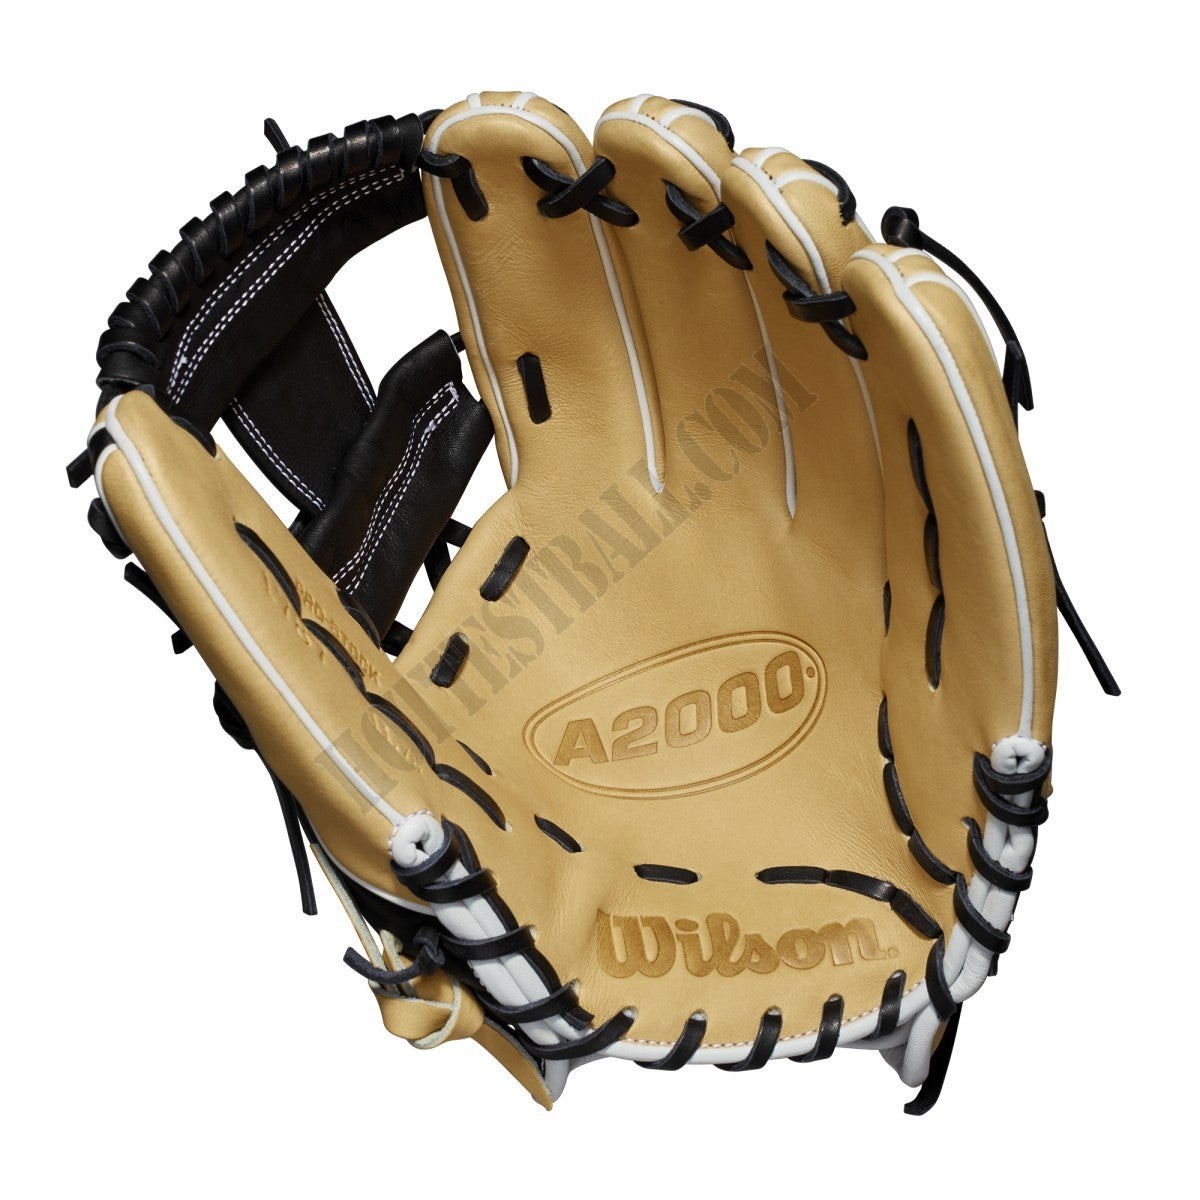 2019 A2000 1787 11.75" Infield Baseball Glove - Right Hand Throw ● Wilson Promotions - -2